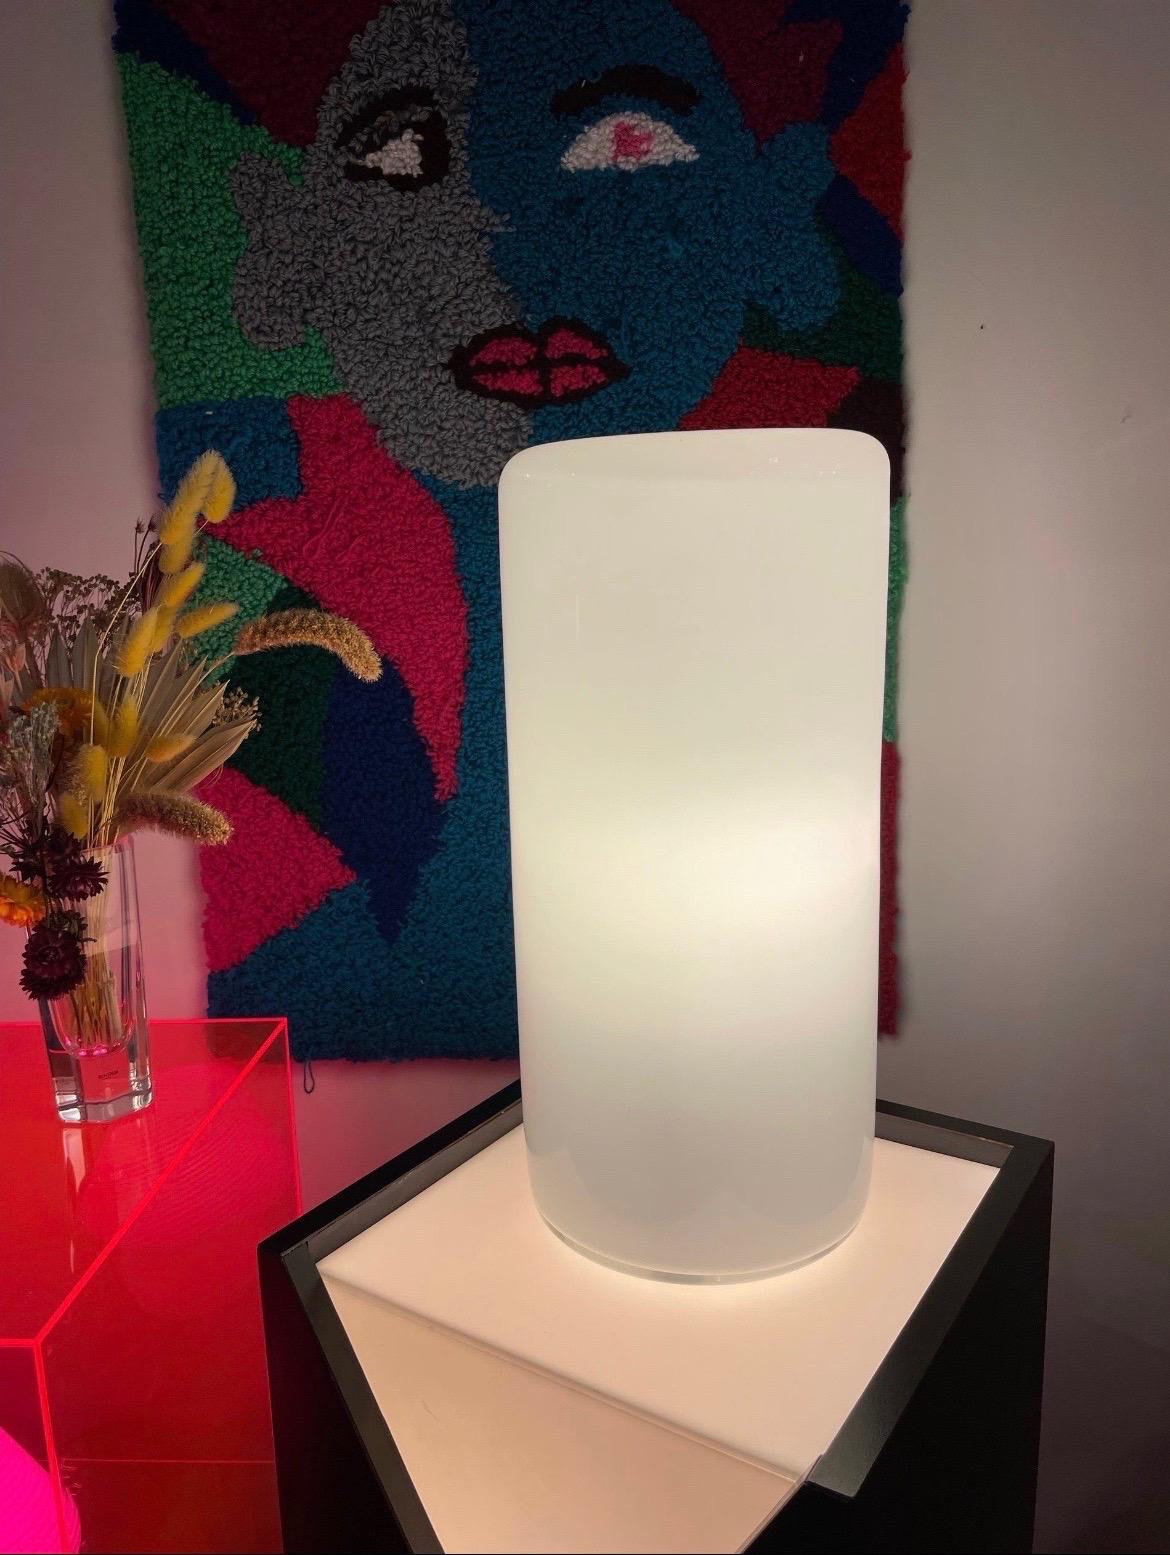 Simply stunning 80’s murano lamp by master glassworker Alfredo Barbini. Masterfully cylindrical body of white opaline glass is bordered with transparent glass; the imperfect top reminds us this beauty is handmade. In excellent condition. Newly